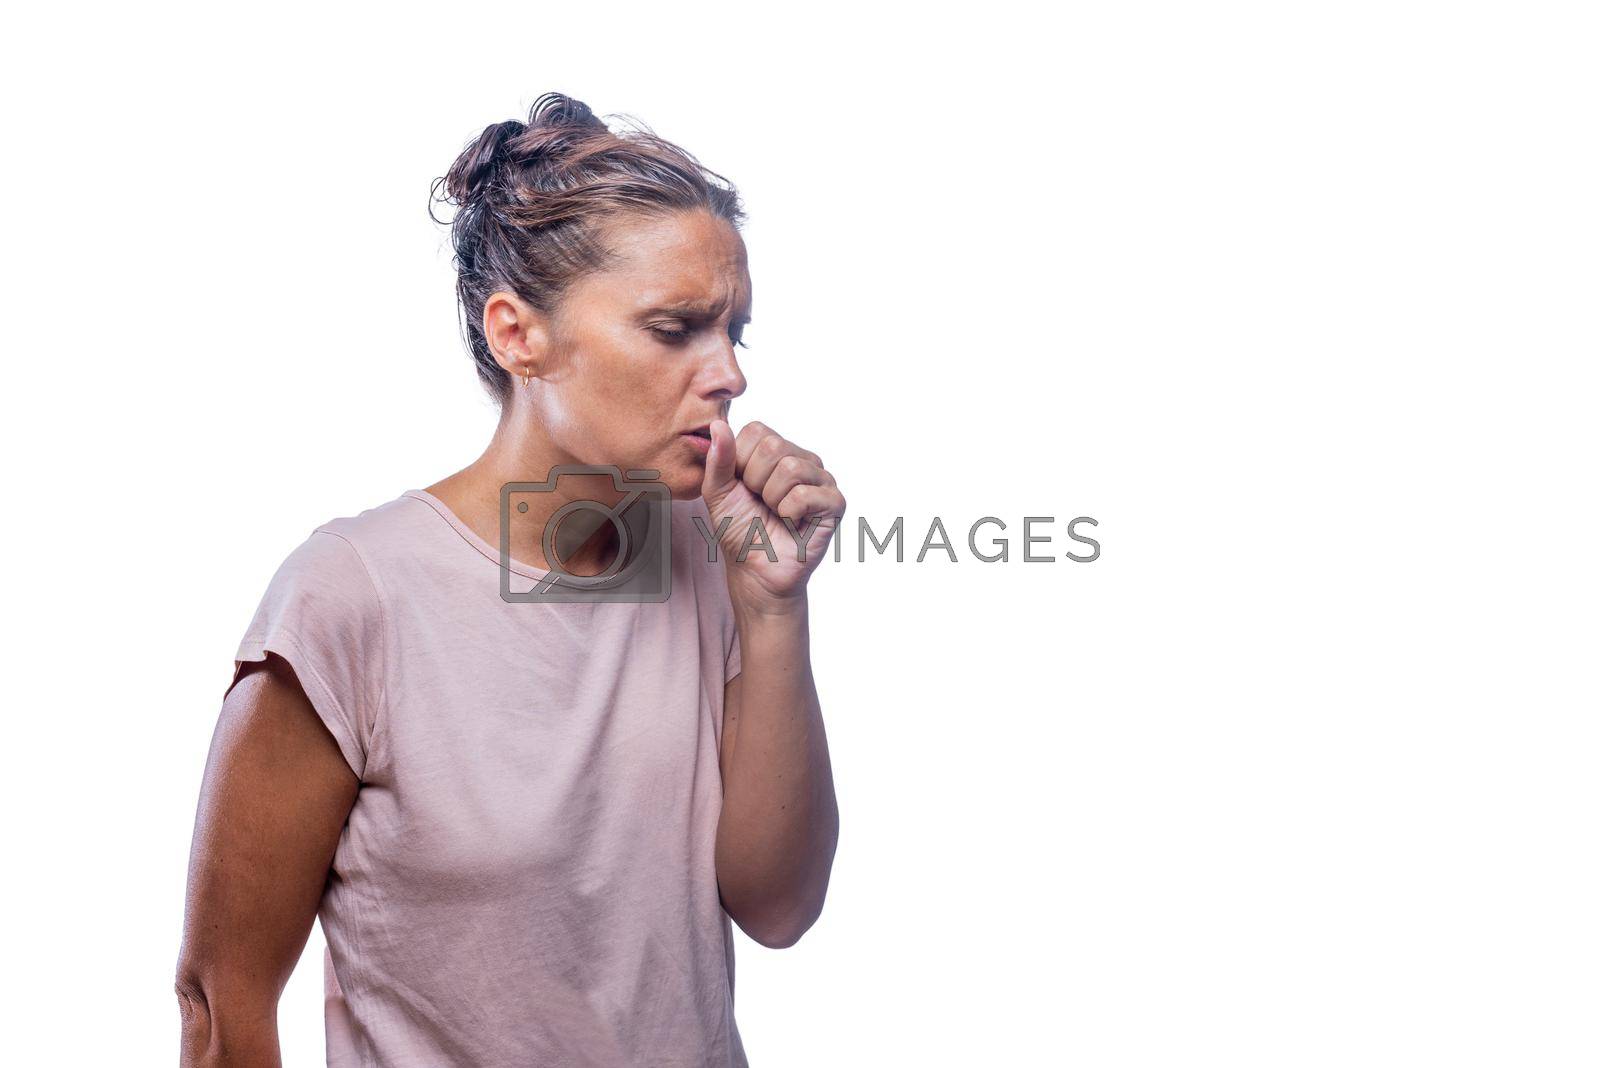 Royalty free image of An adult woman with cough on a white background by ivanmoreno